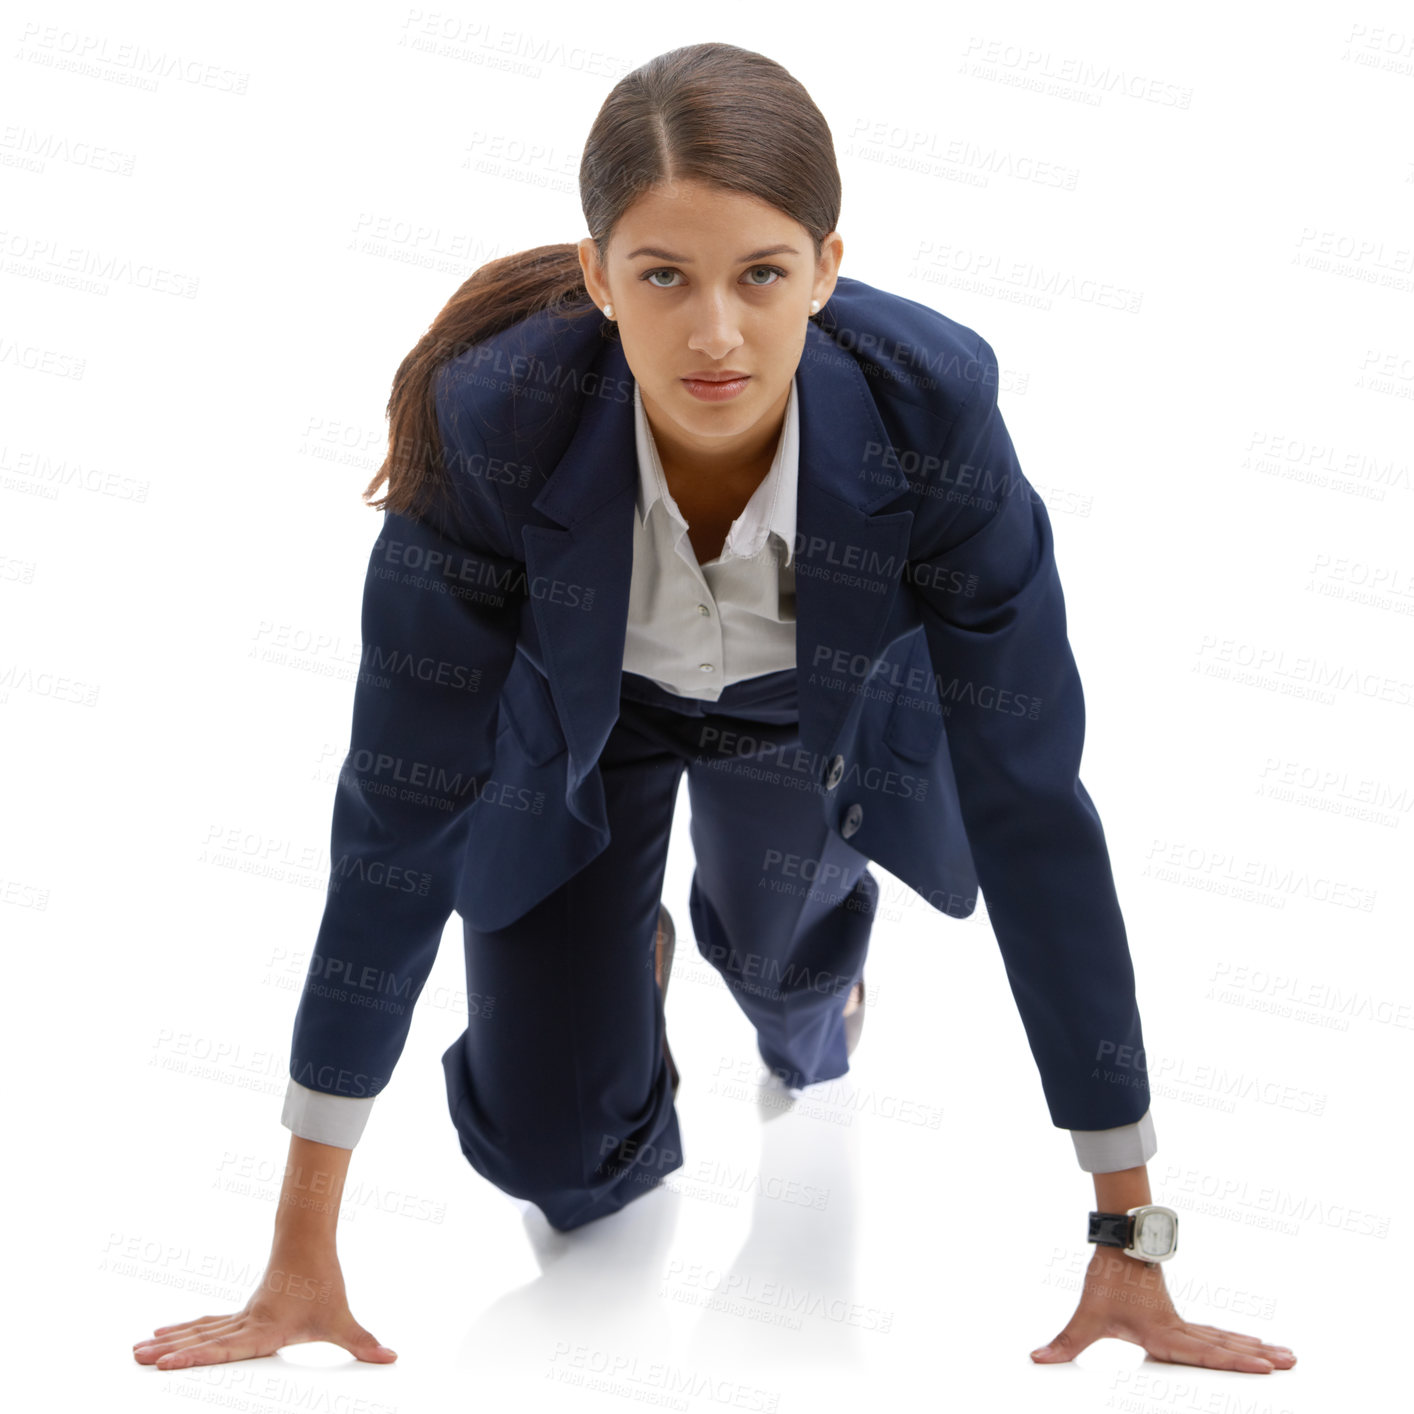 Buy stock photo Portrait of an attractive young businesswoman in a pre-running position isolated on white